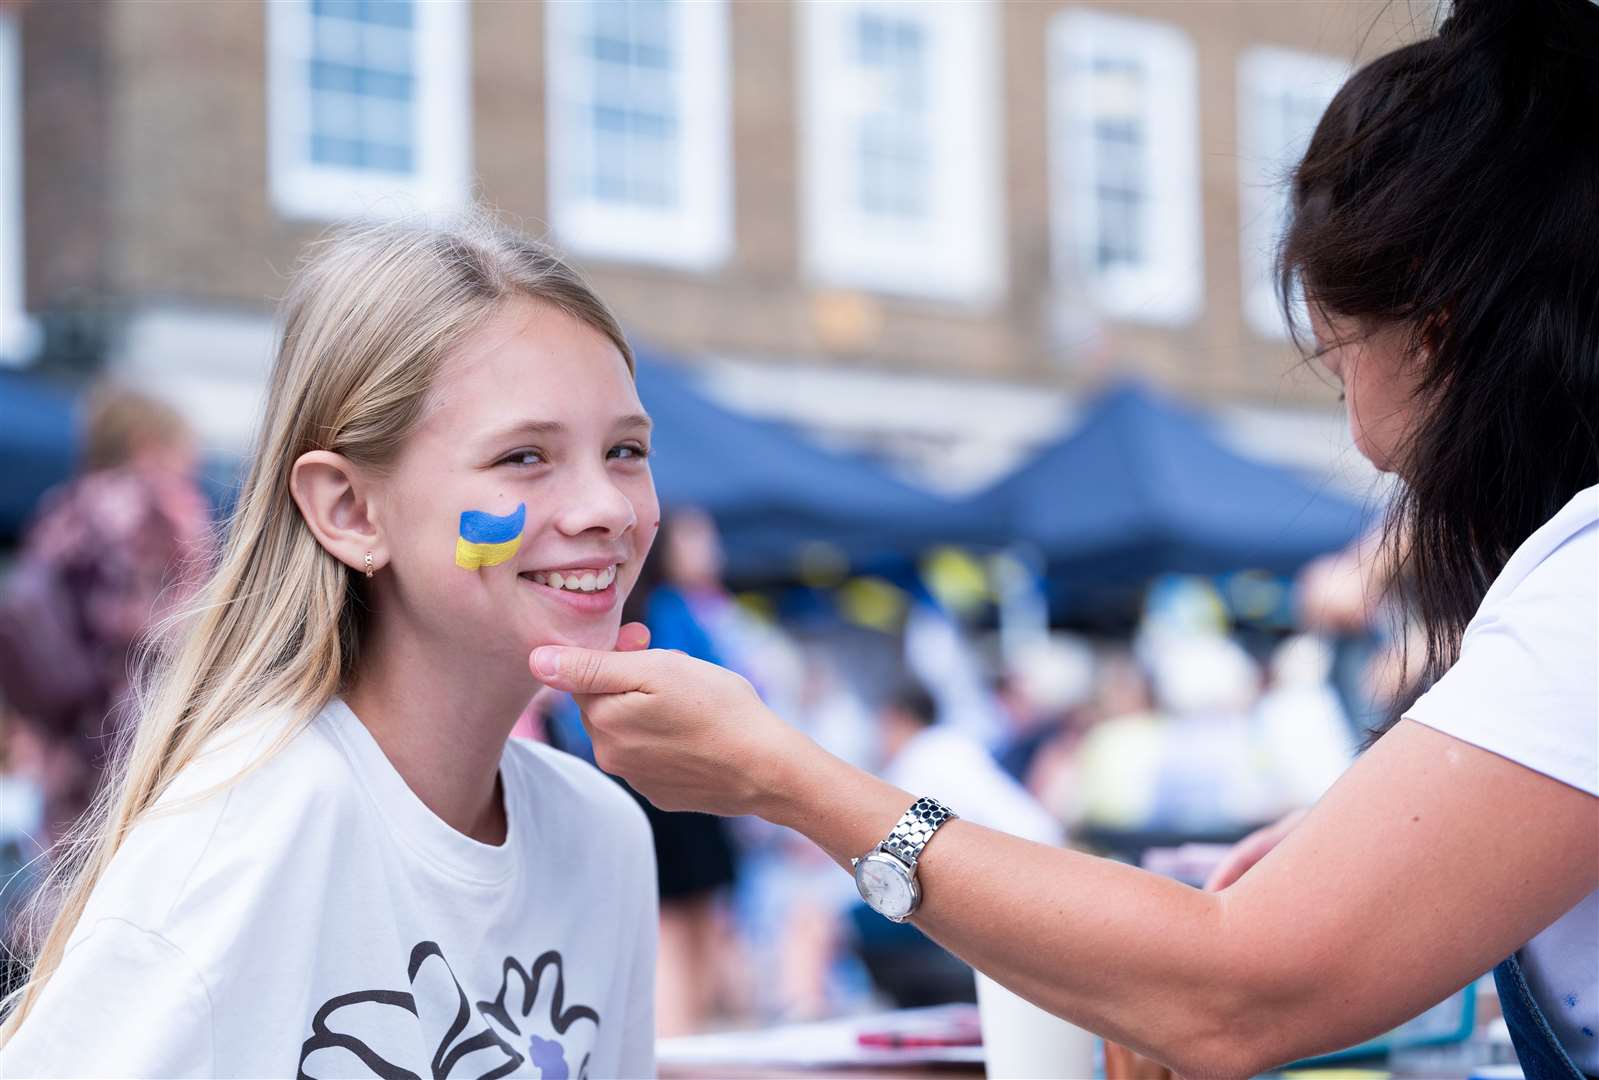 Many got their faces painted with the Ukraine flag. Picture: Ian Burt